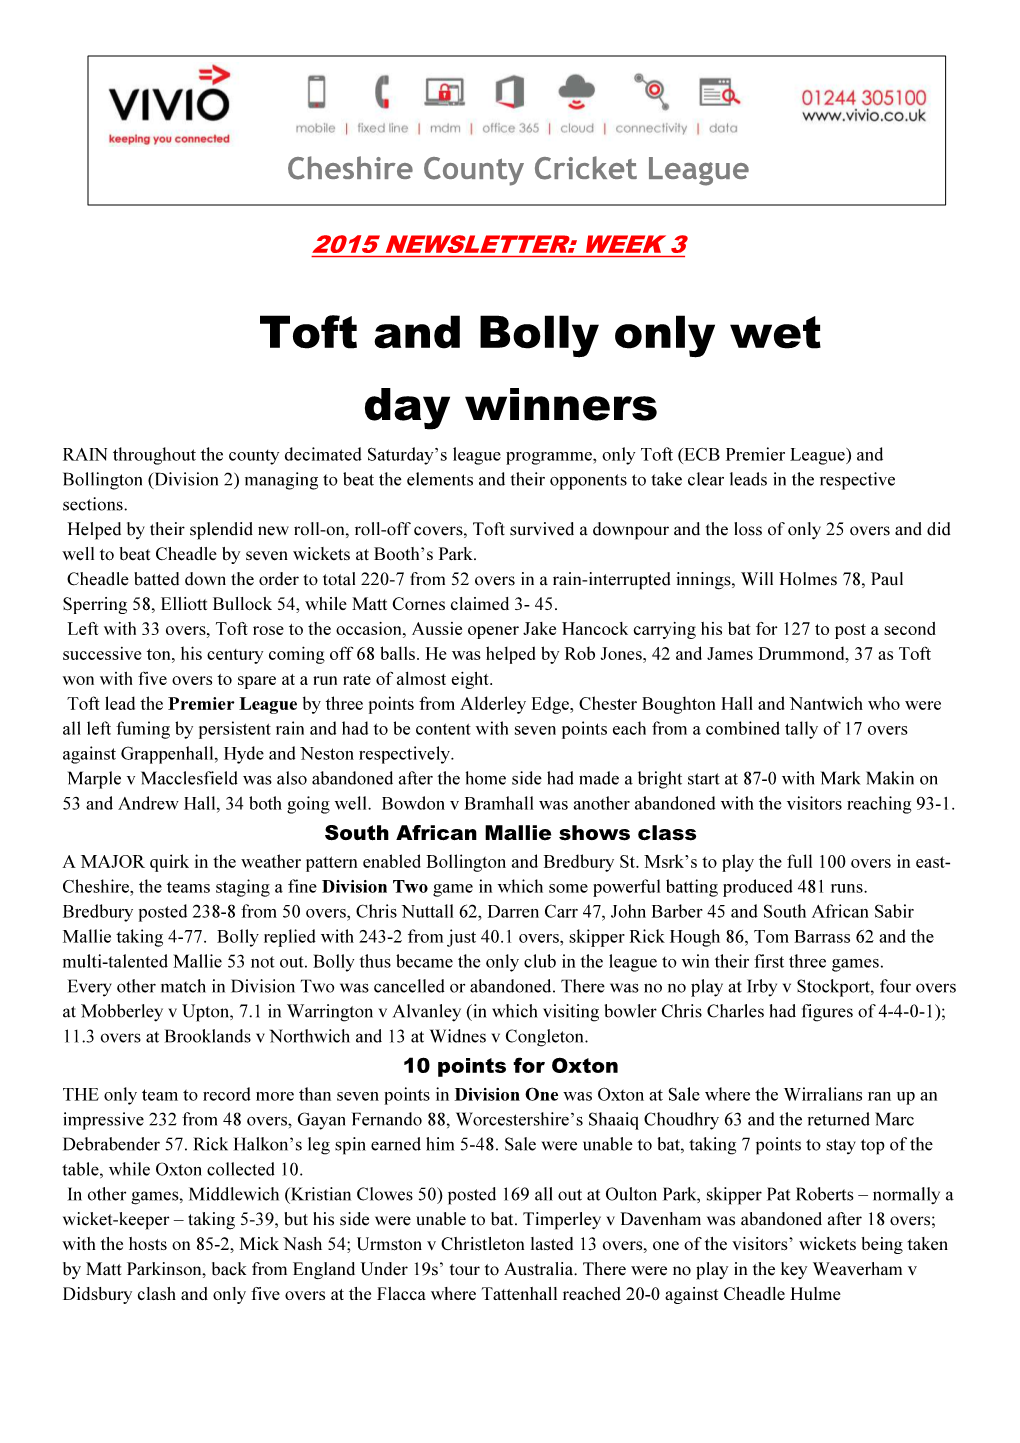 Toft and Bolly Only Wet Day Winners